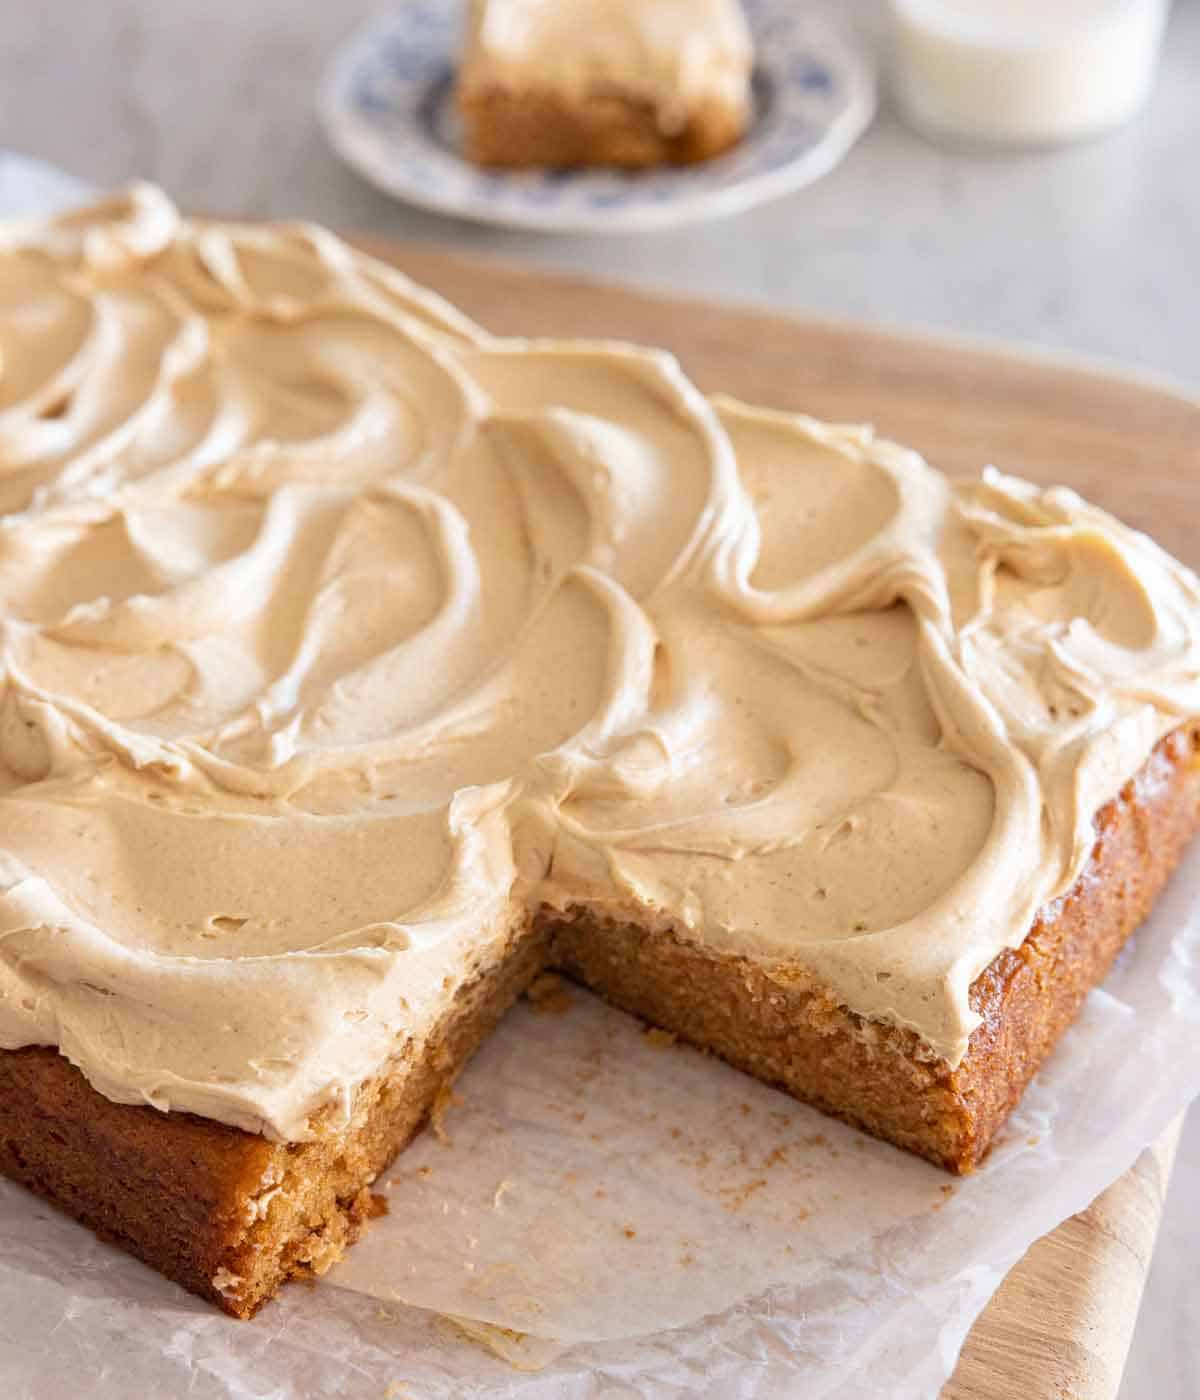 A peanut butter cake with a slice cut out, on top of a serving board.